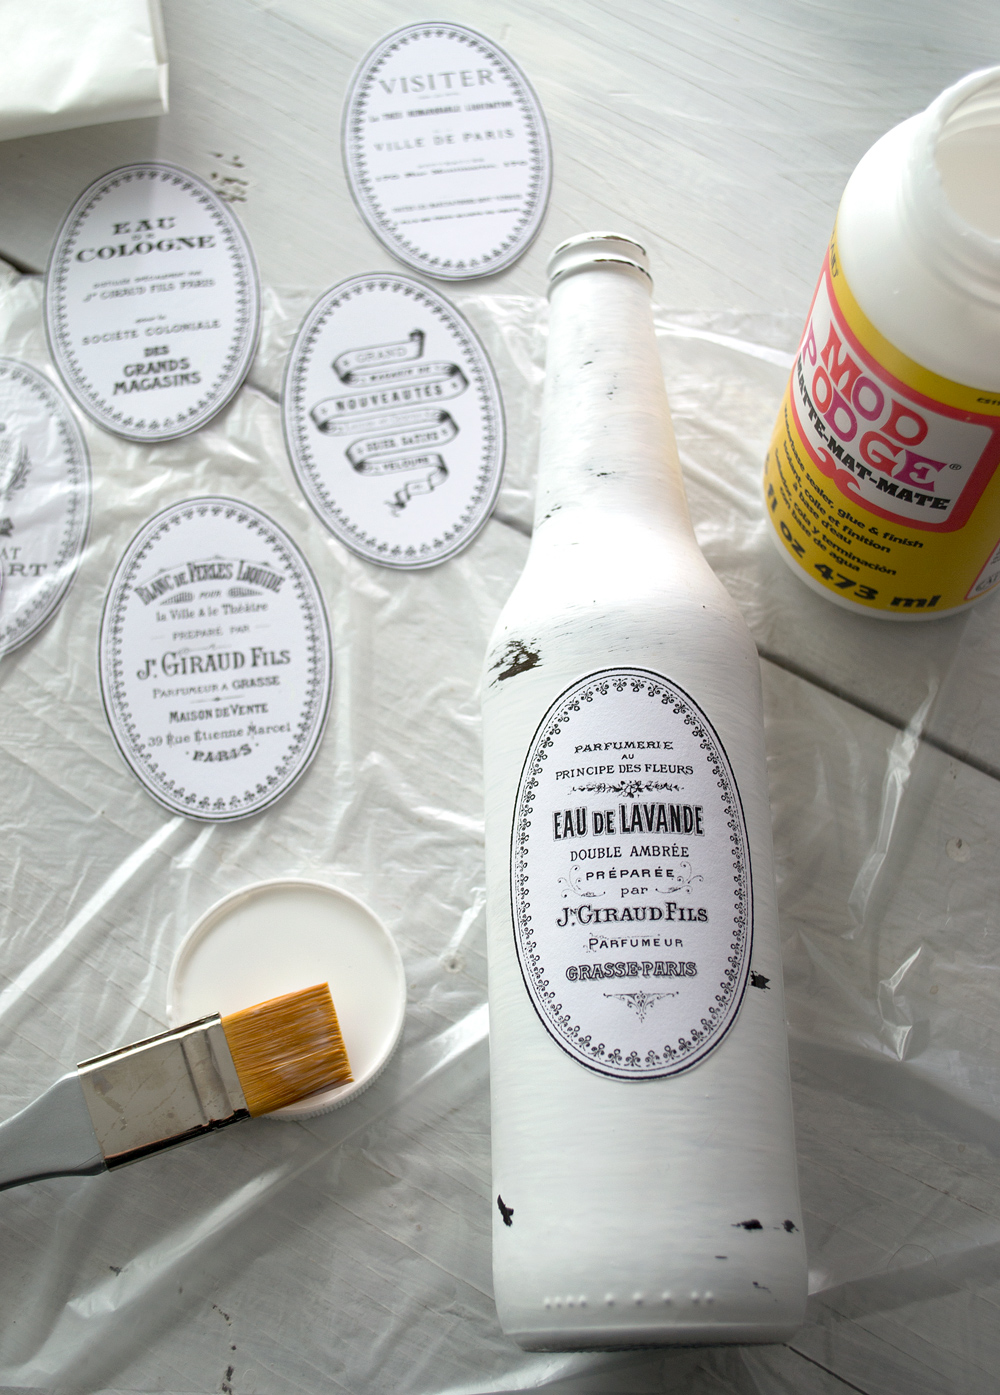 DIY Painted and Distressed French Bottles project + free printable